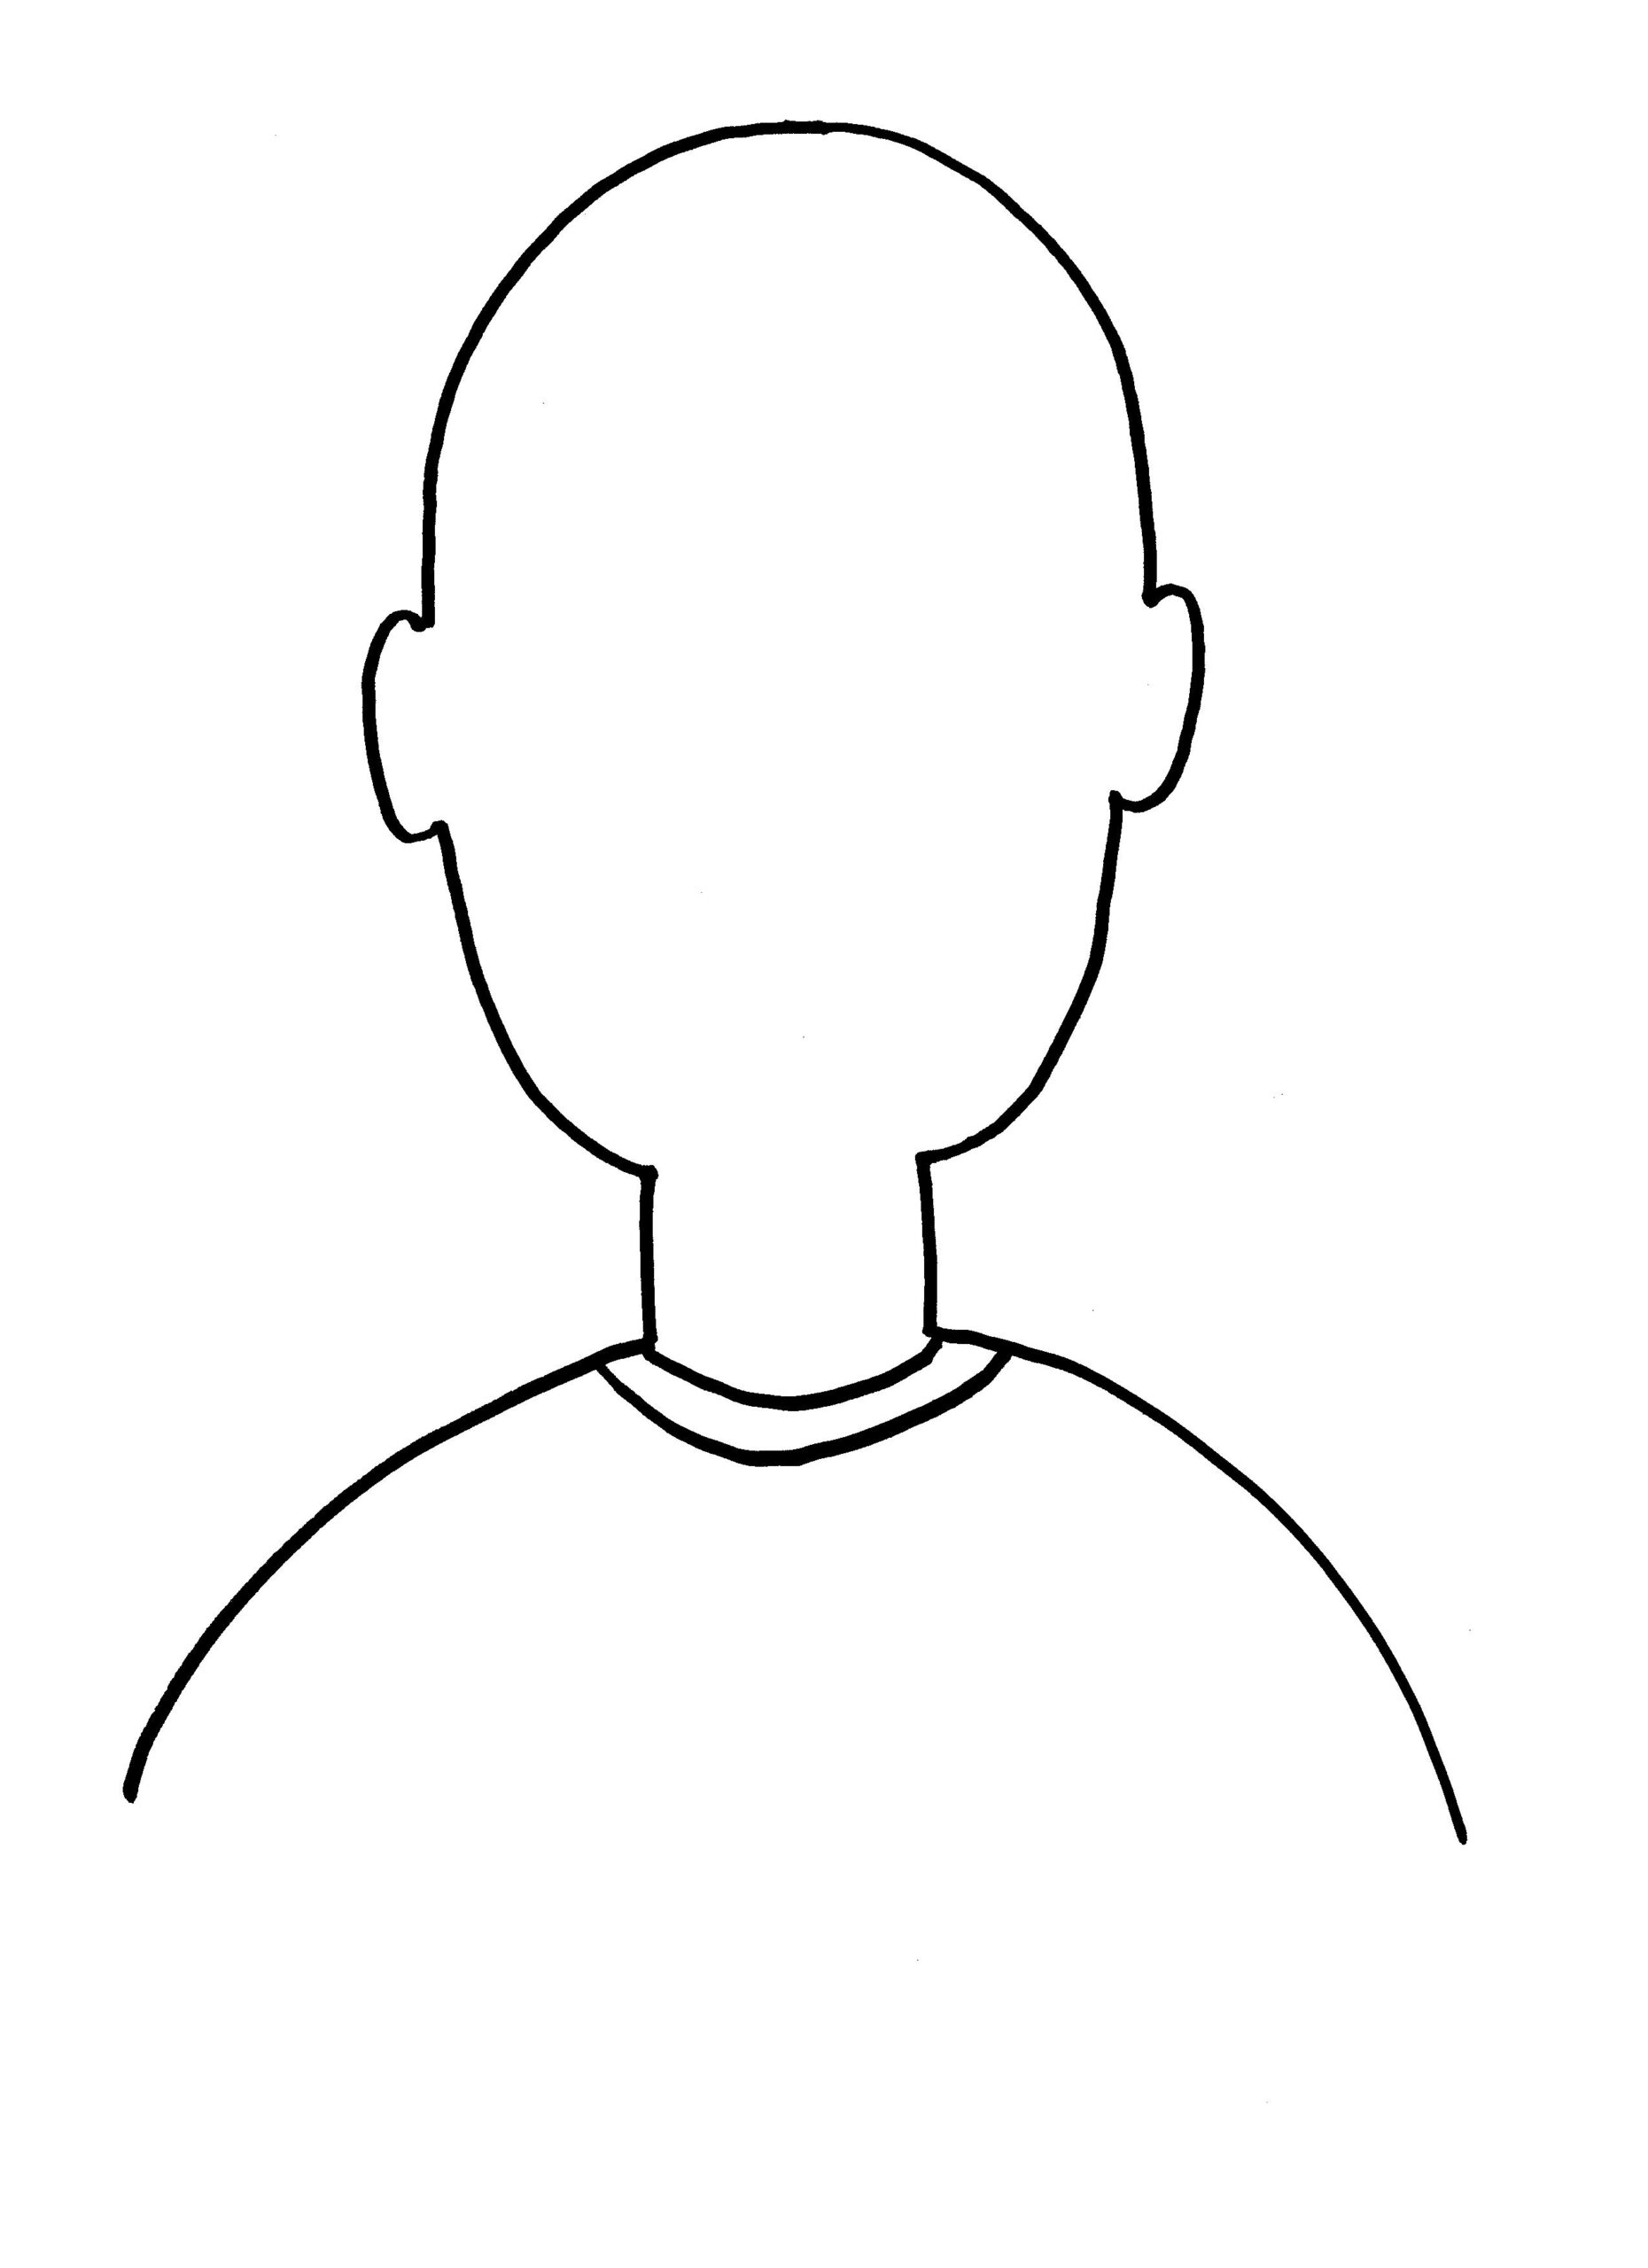 Free Blank Face Template, Download Free Blank Face Template png  Regarding Blank Face Template Preschool